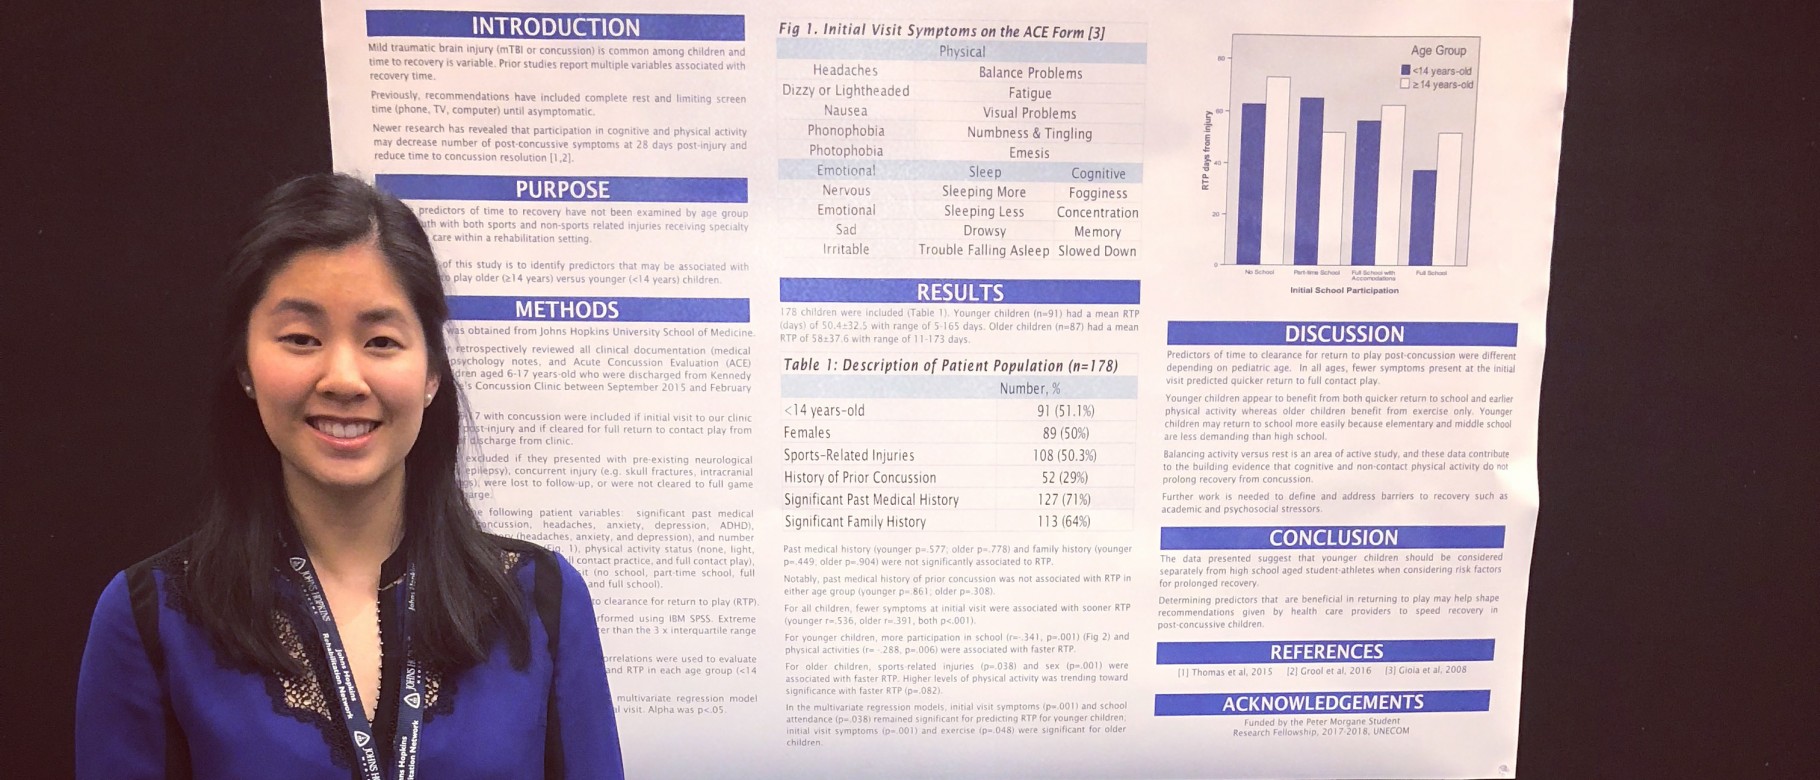 Kaitlyn Chin presents at the Association of Academic Physiatrists (AAP) Annual Meeting in Atlanta, Georgia. 